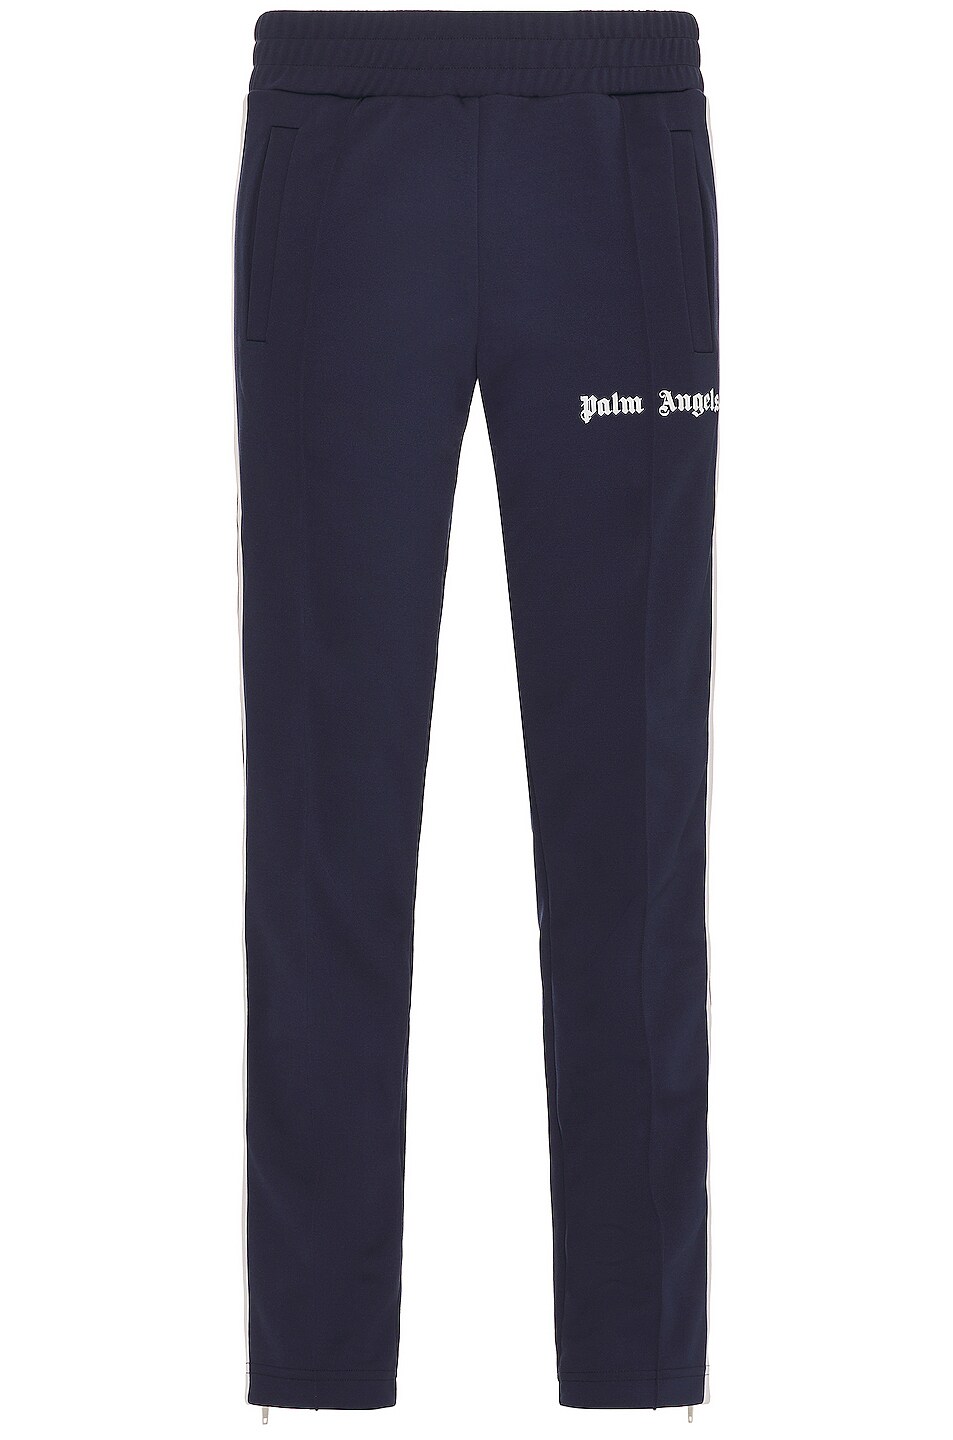 Image 1 of Palm Angels Classic Track Pants in Navy Blue & White